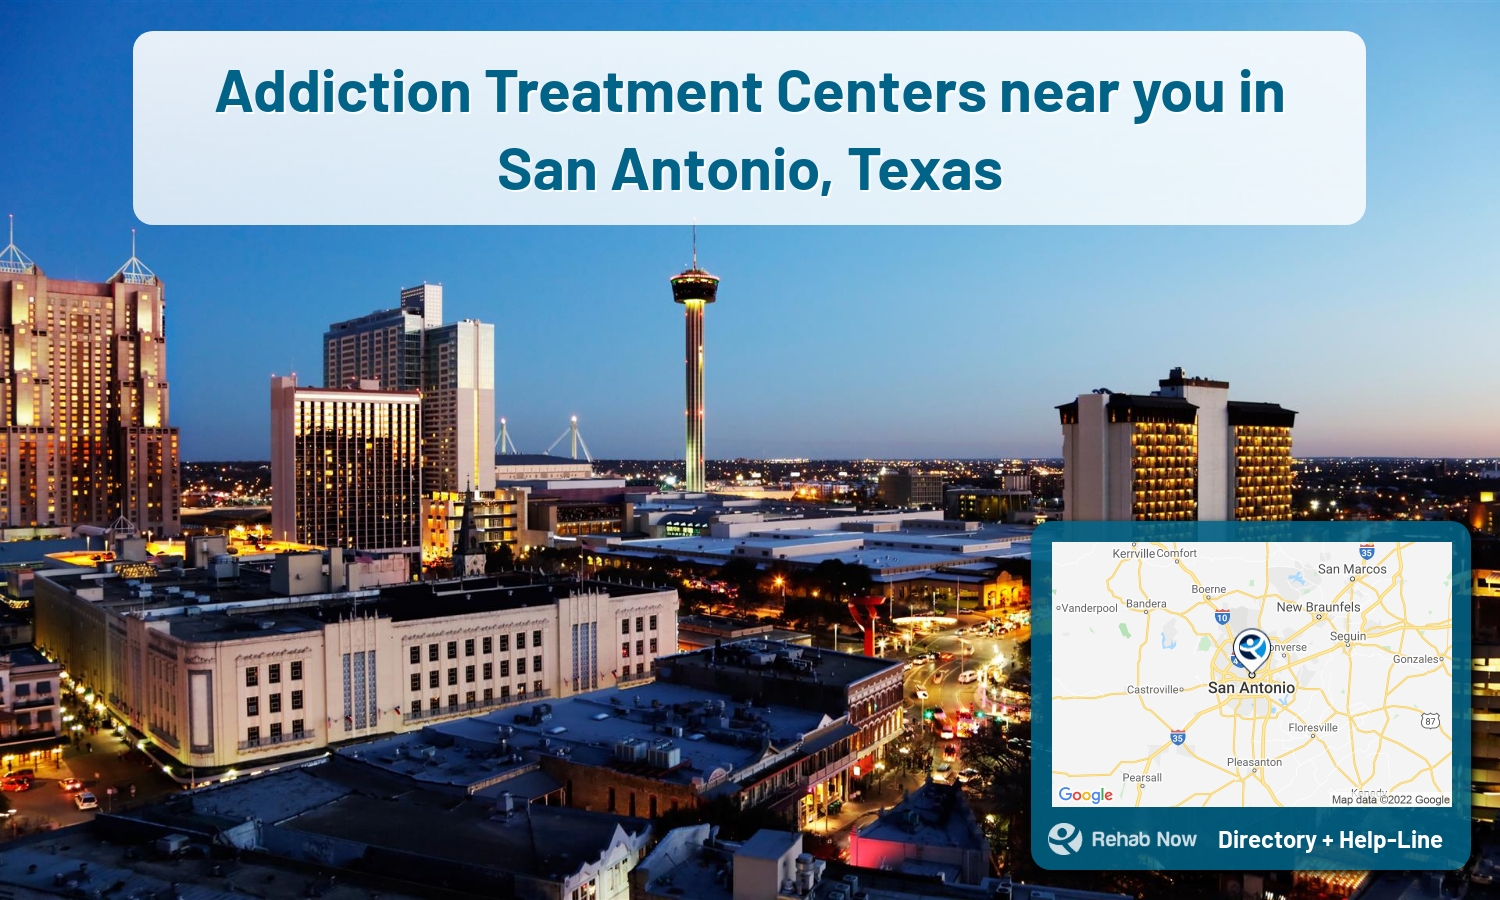 View options, availability, treatment methods, and more, for drug rehab and alcohol treatment in San Antonio, Texas